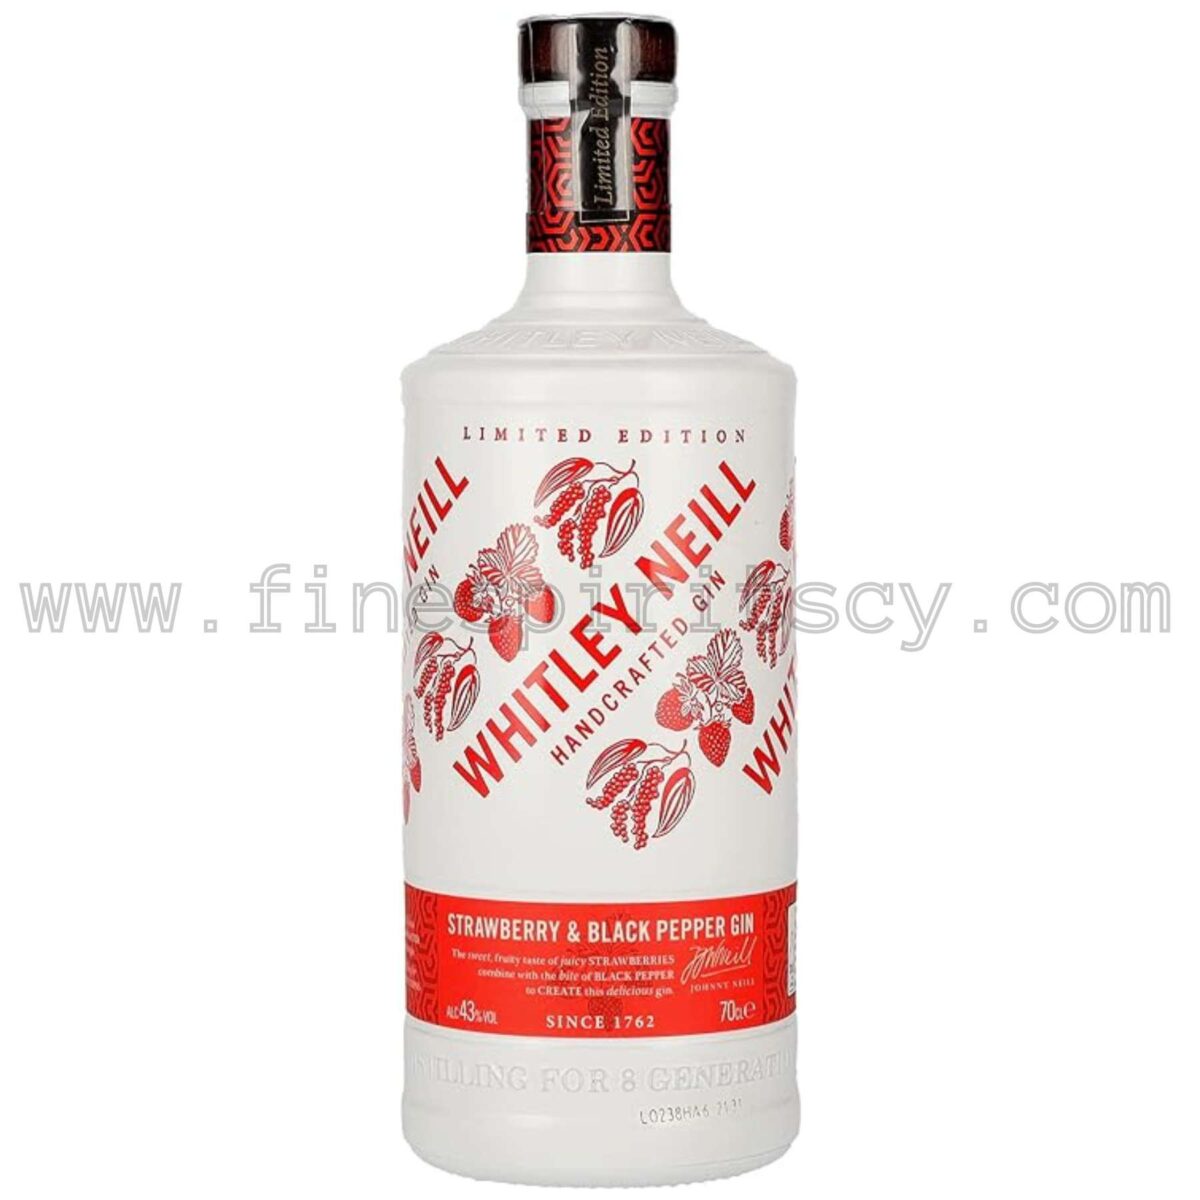 Whitley Neill Strawberry And Black Pepper Gin Limited Edition Cyprus Price Order Online